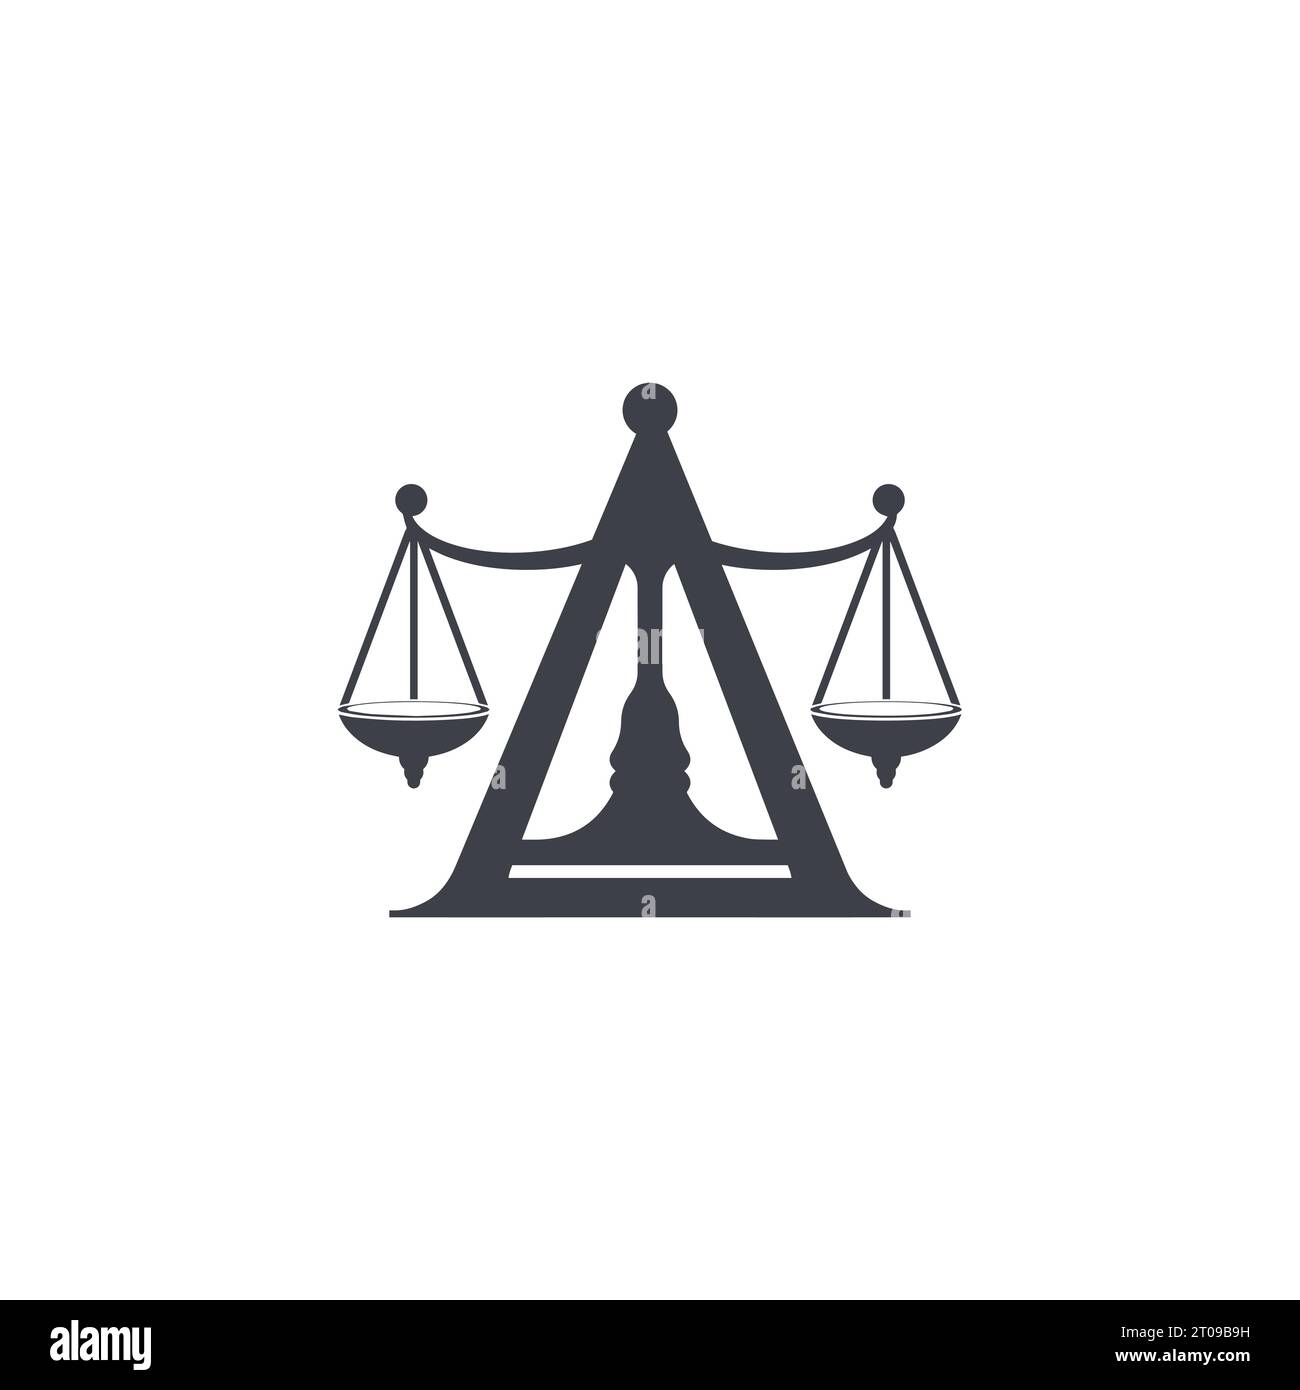 Law firm logo with initial letter a concept. Initial letter A law firm logo design. Law firm logo with initial A letter and judge hammer image vector Stock Vector